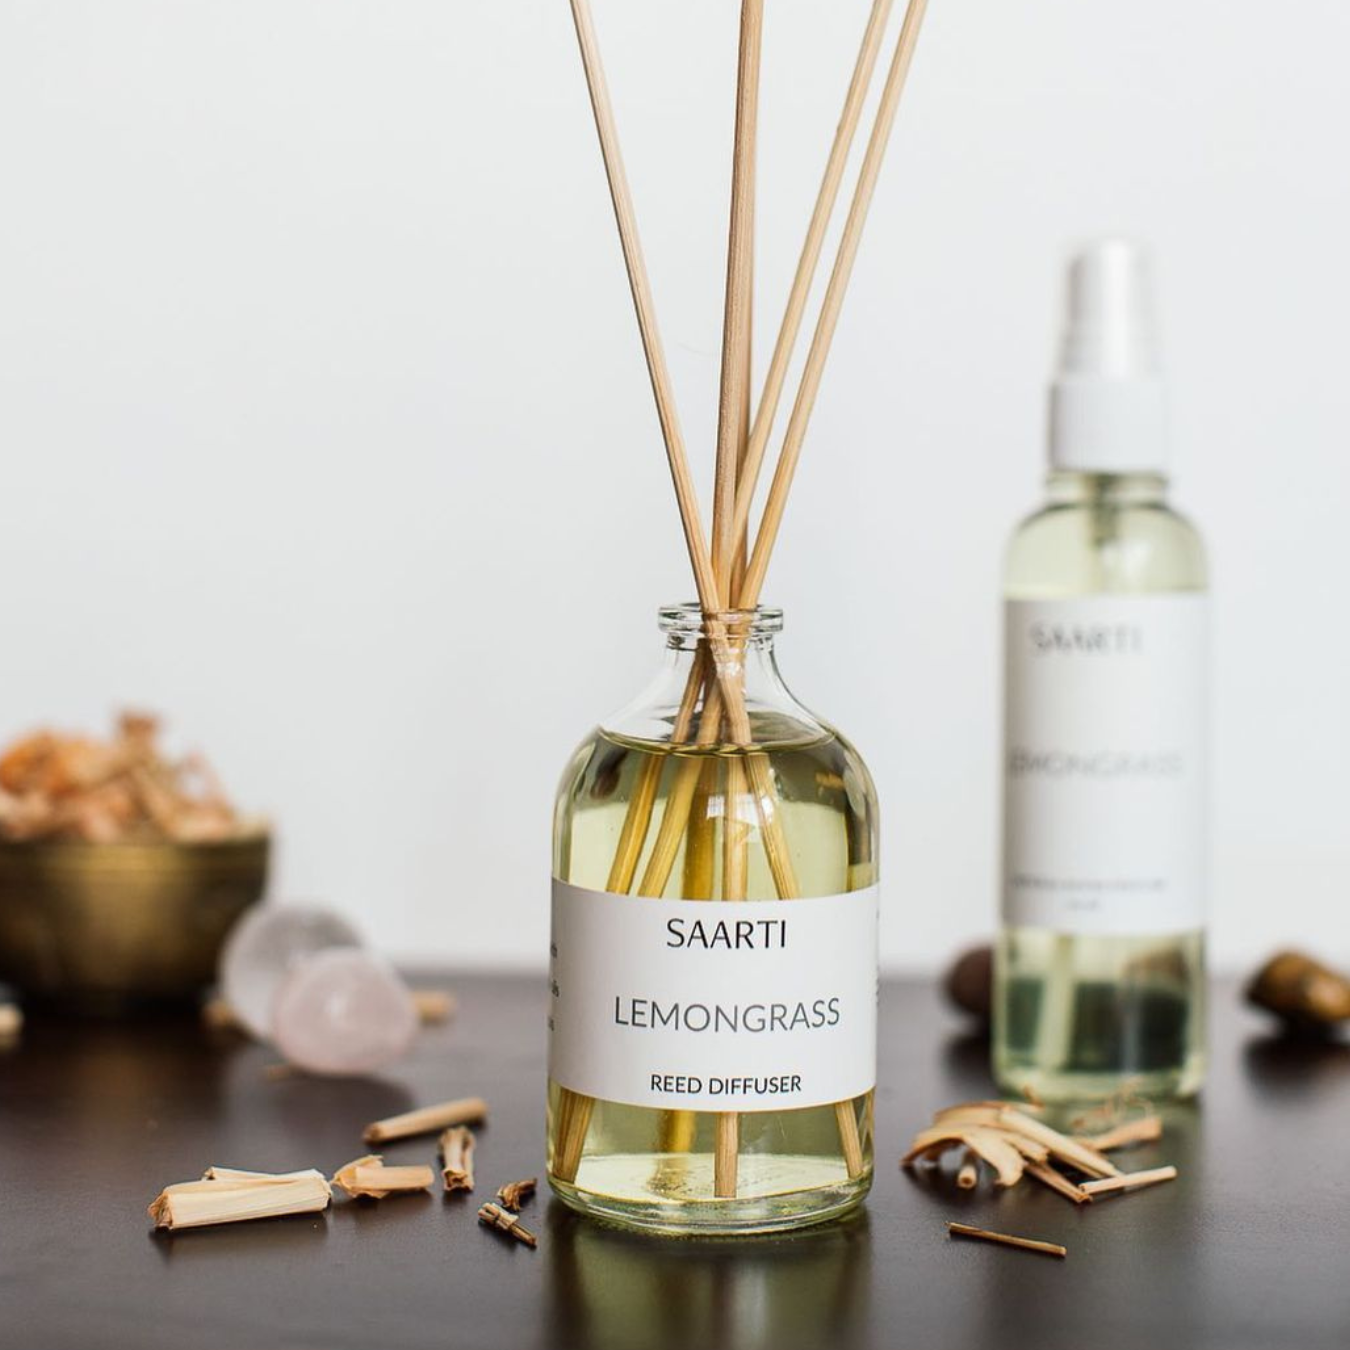 This natural Lemongrass Reed Diffuser from Saarti uplifts the spirit, promotes joy and happiness, and refreshes any space with a calming scent. Its essential oils travel through reed sticks to disperse into the air, providing holistic emotional benefits and a pleasing aroma. With 120ml of oil, this Cambodian-inspired diffuser will bring you joy and clarity.